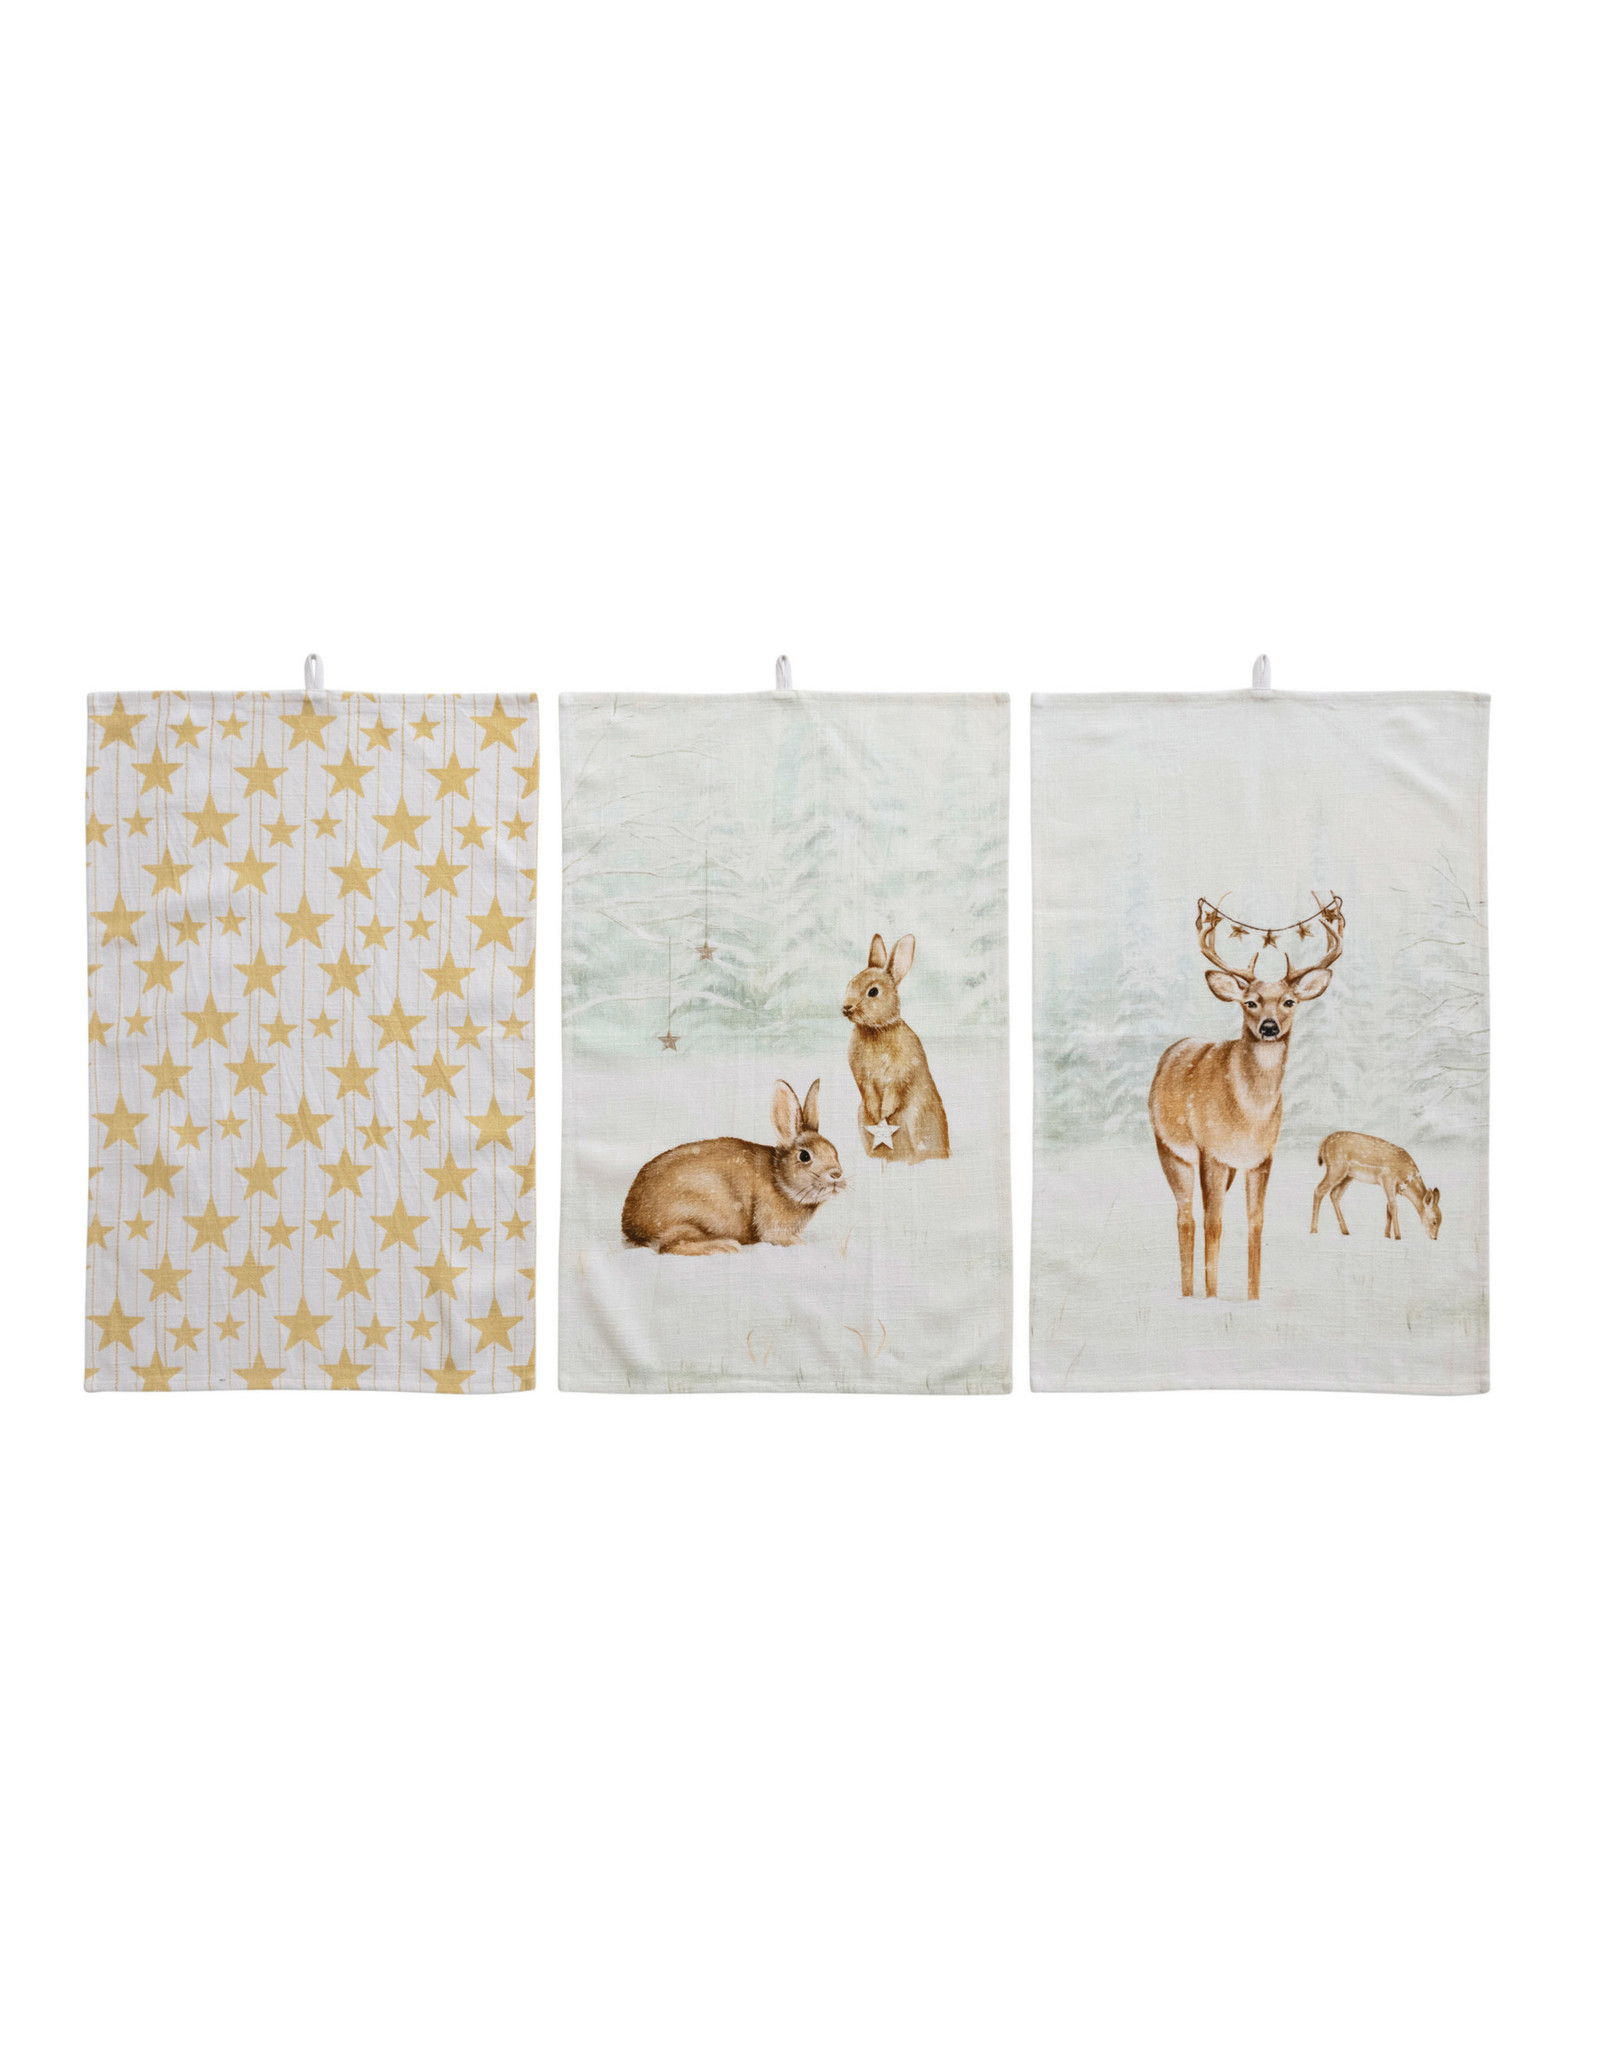 XS0114A 28"L X 18"W Cotton Tea Towel with Forest Animals/Stars, Multi Color, 3 Styles EACH